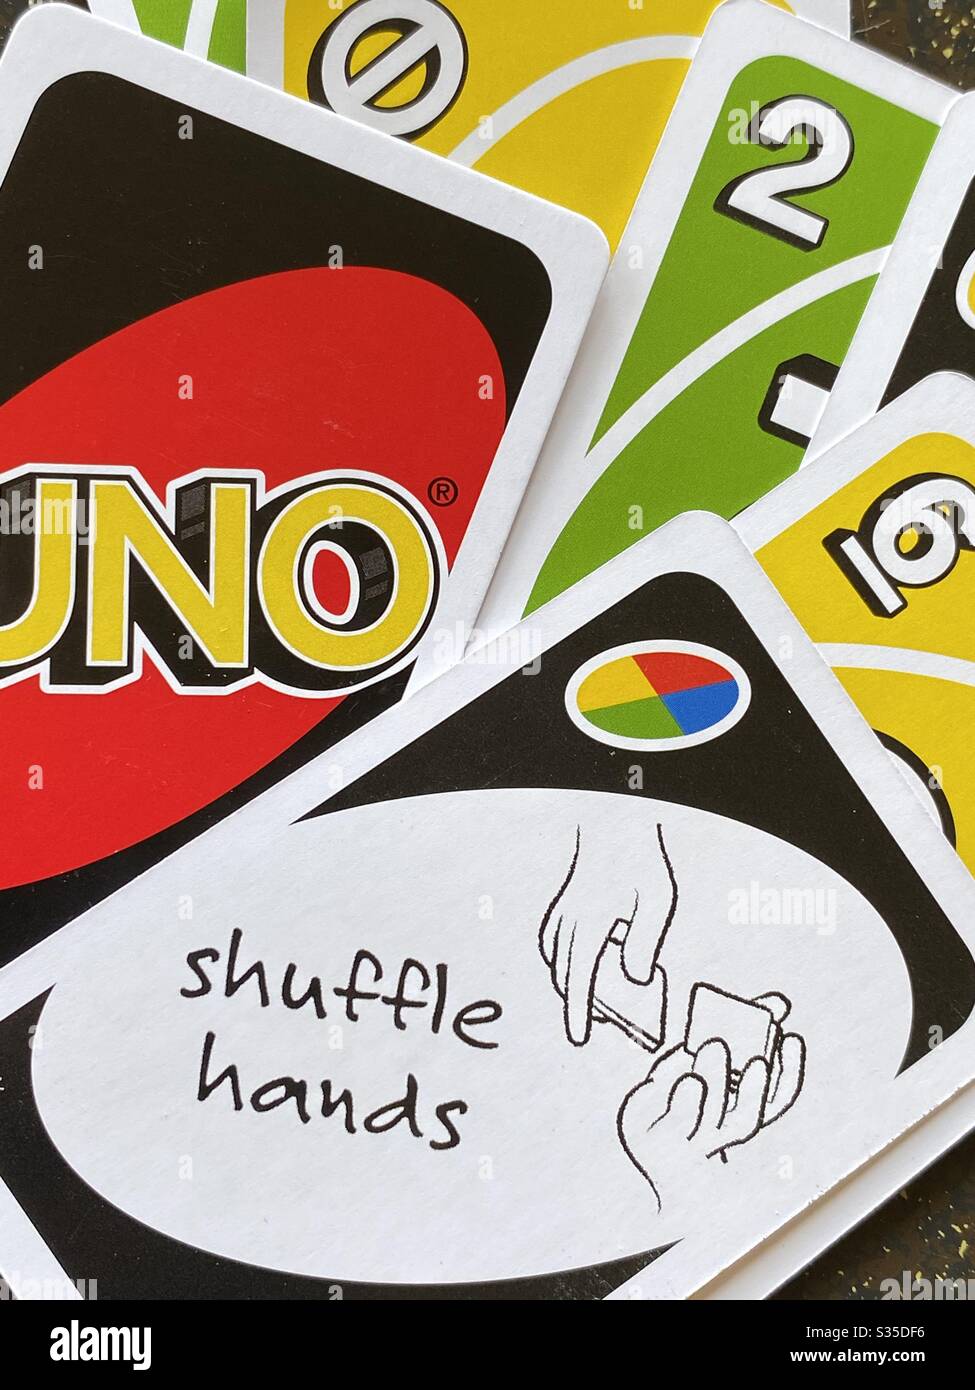 Card game uno with a shuffle hand cards and numbered cards Stock Photo